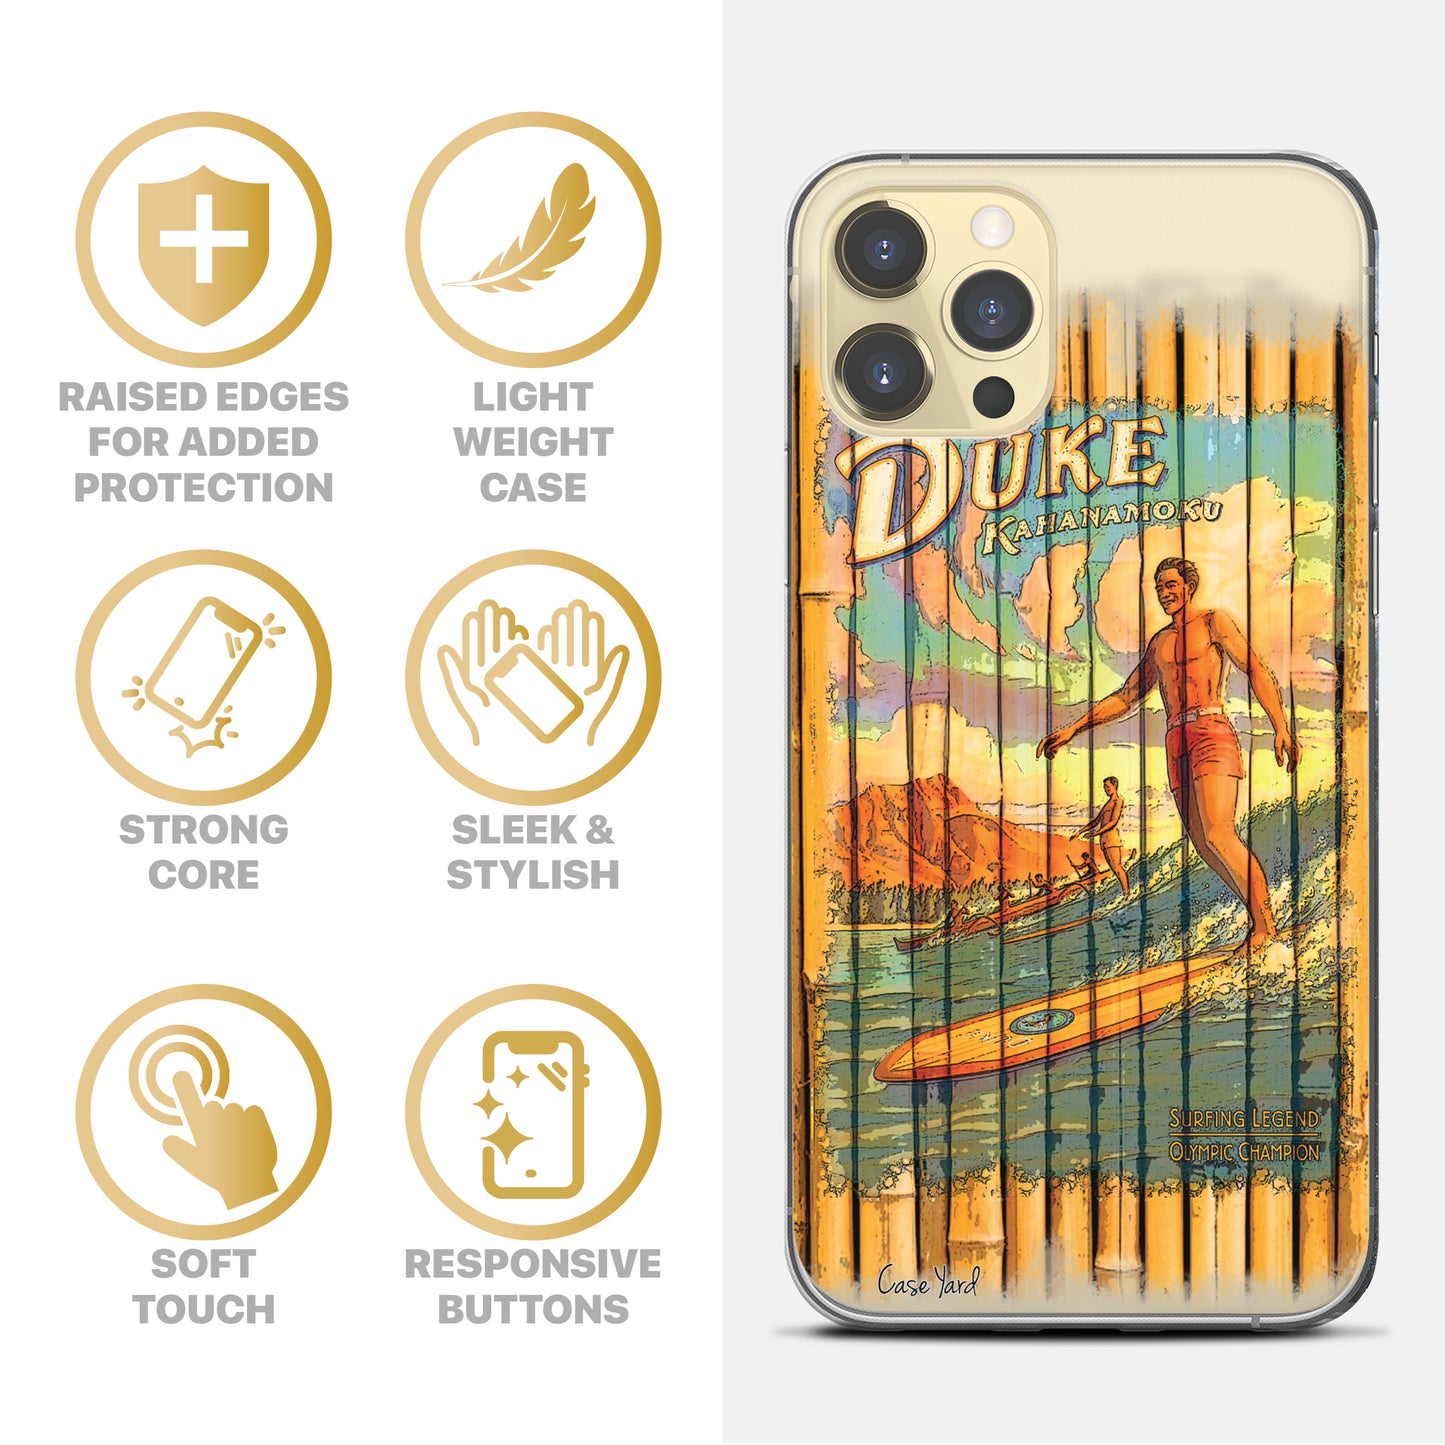 TPU Clear case with (Duke) Design for iPhone & Samsung Phones